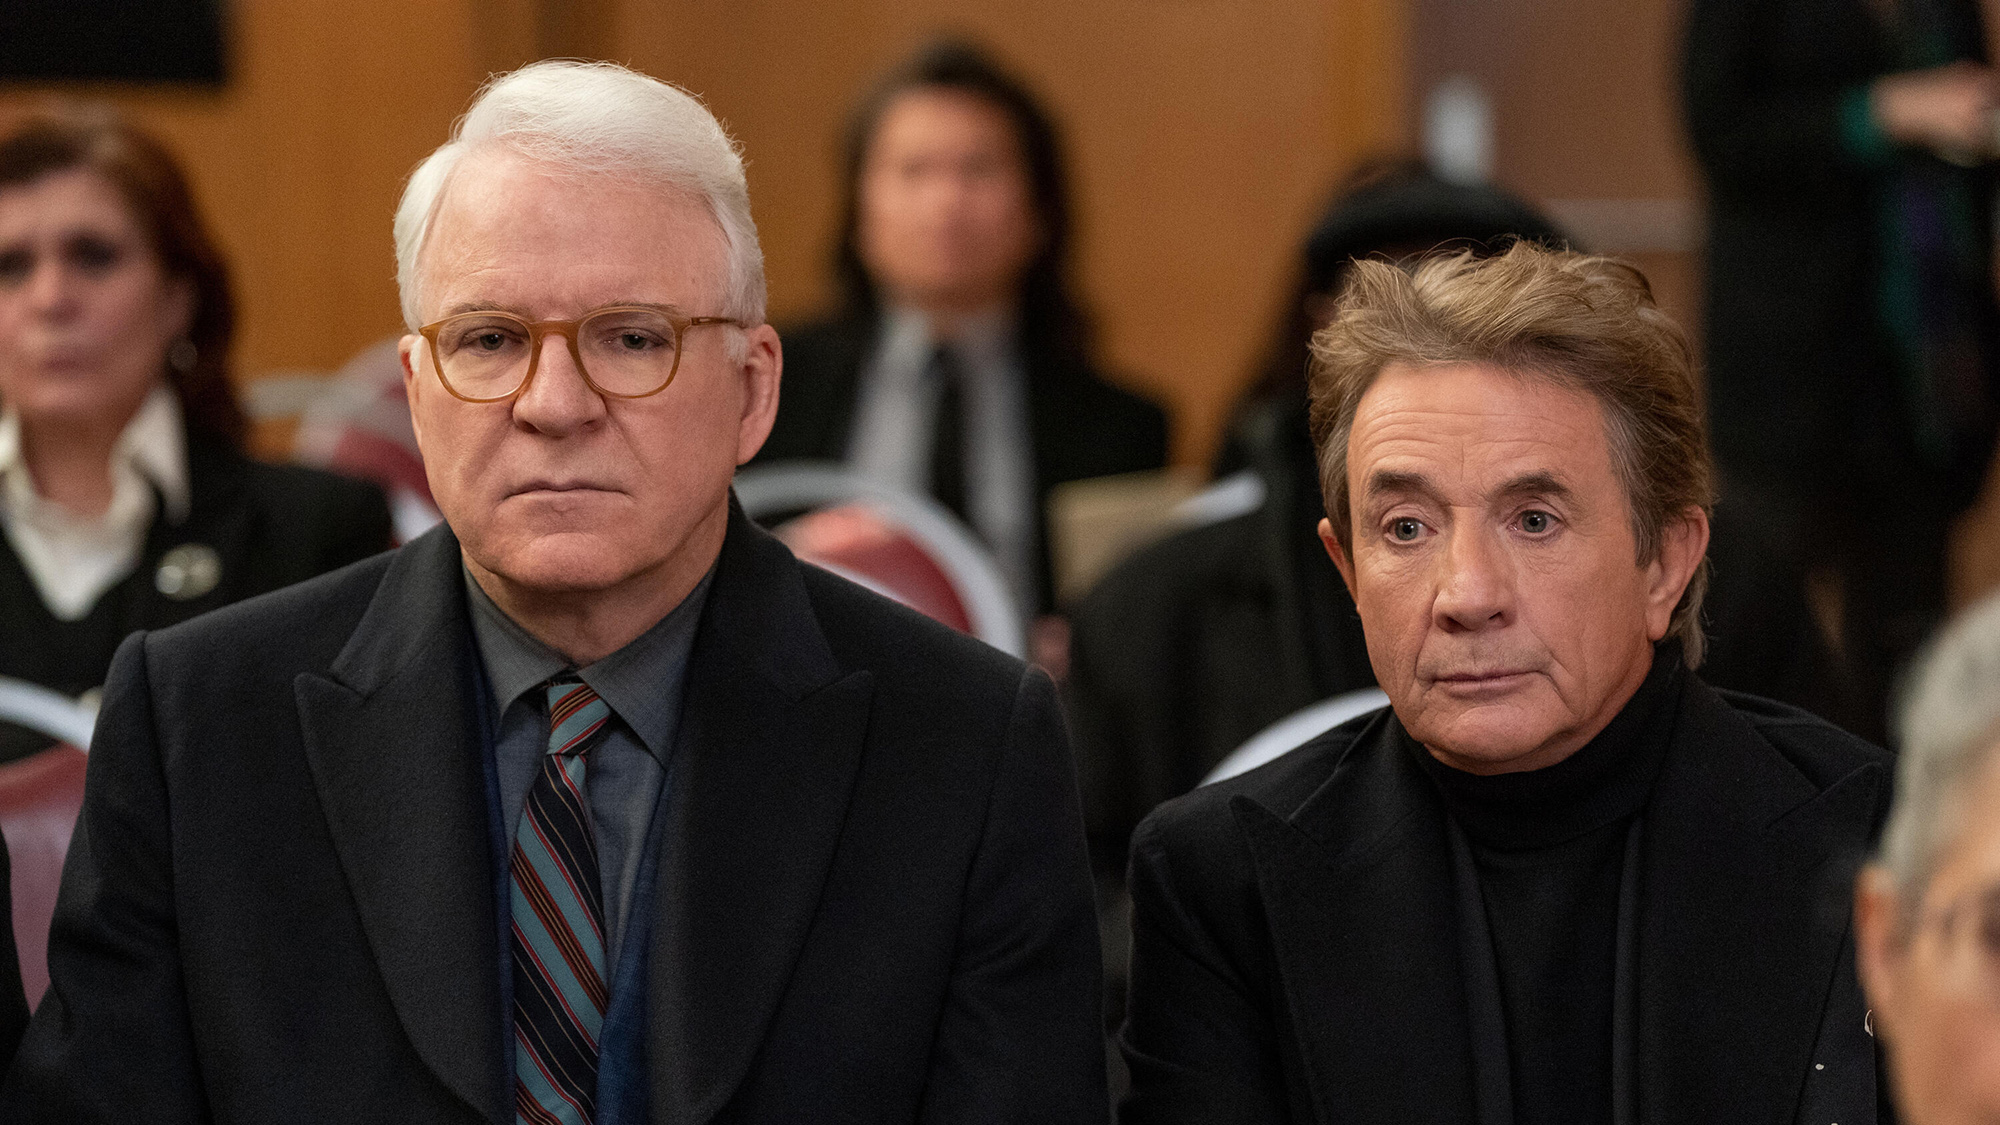 (L, R) Steve Martin as Charles and Martin Short as Oliver in Only Murders in the Building season 3